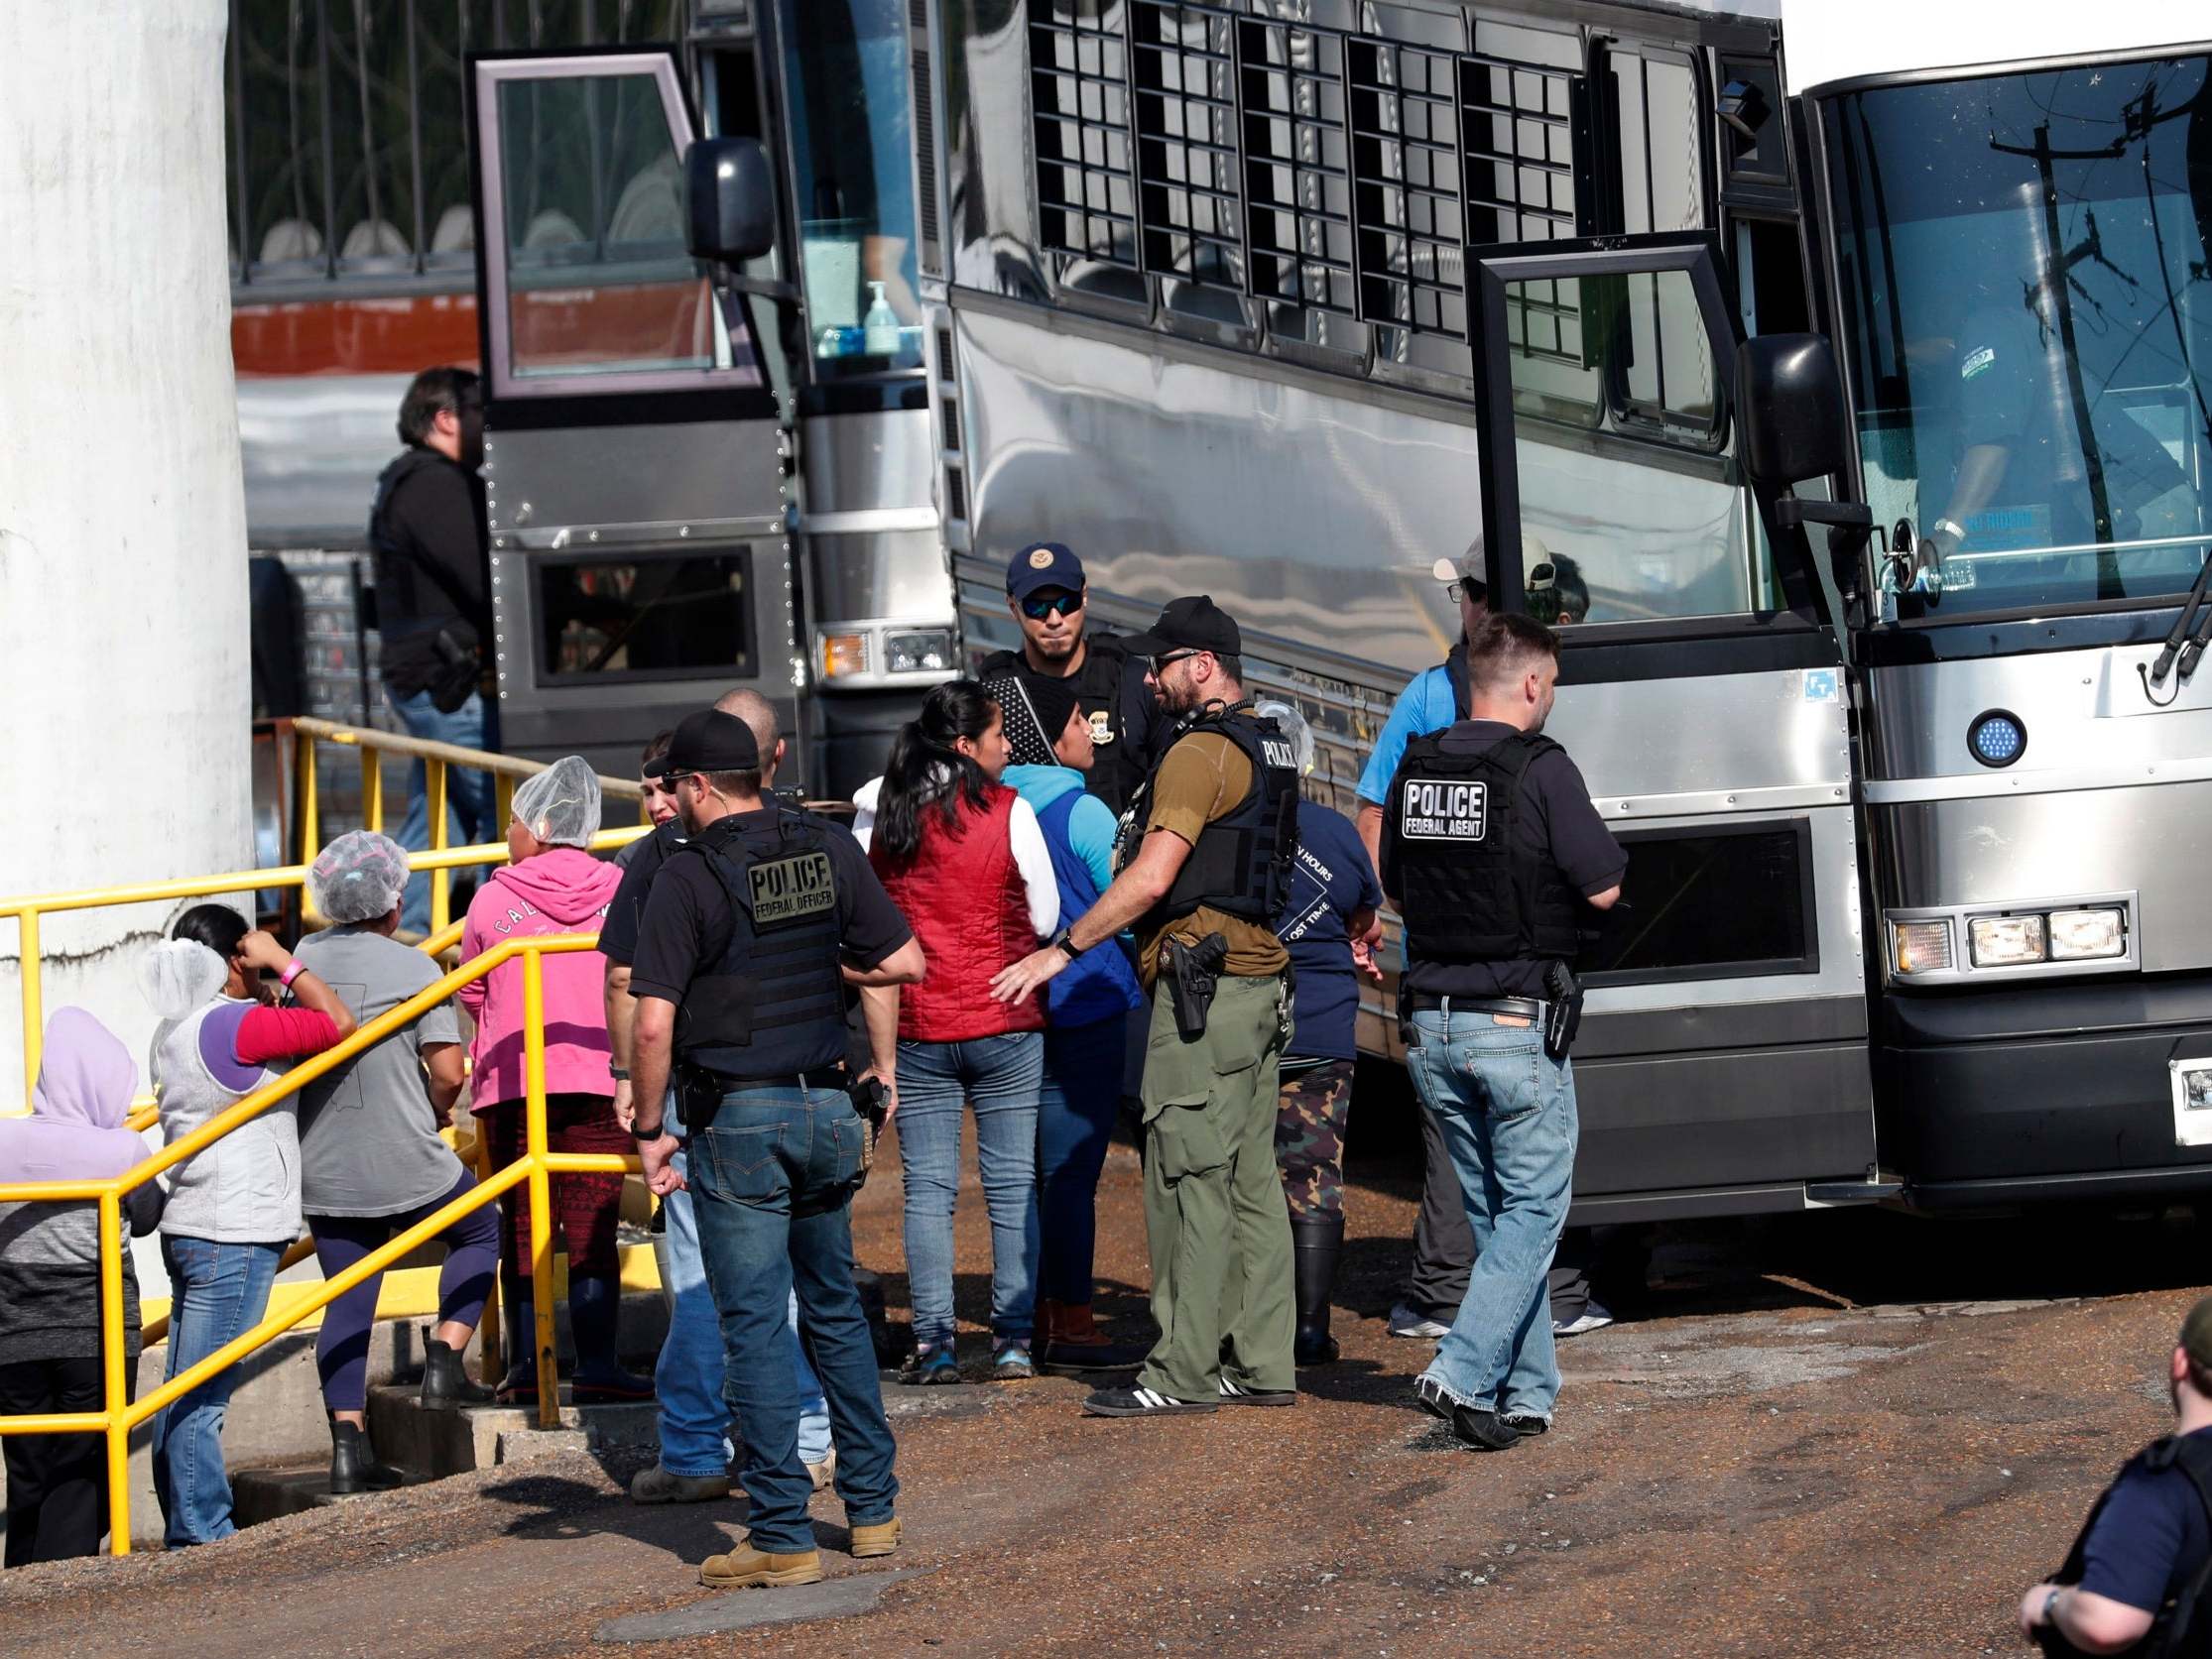 Handcuffed female workers are escorted onto a bus following a raid by US immigration officials at a Koch Foods Inc. plant in Morton, Mississippi, 7 August 2019.